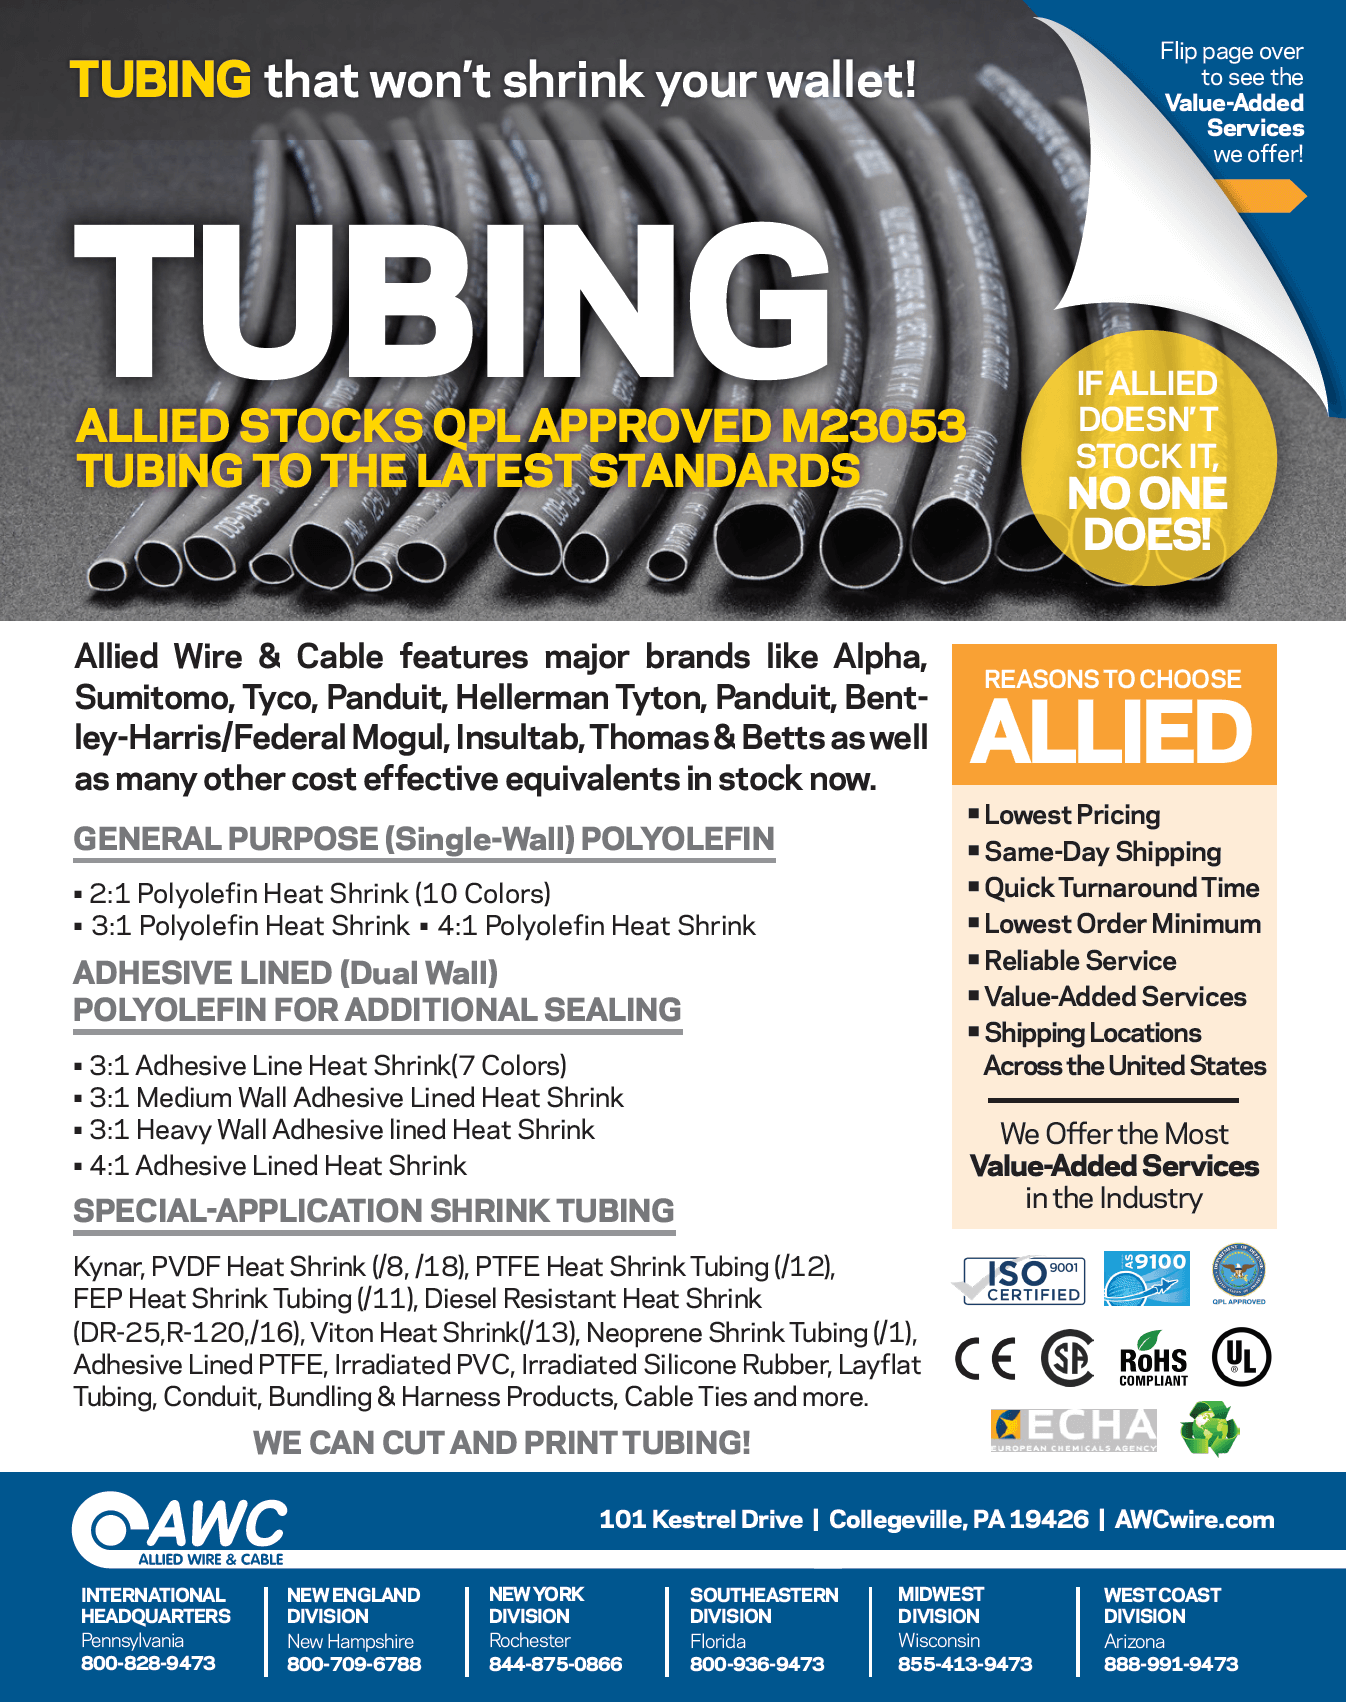 Tubing Line Card from Allied Wire & Cable